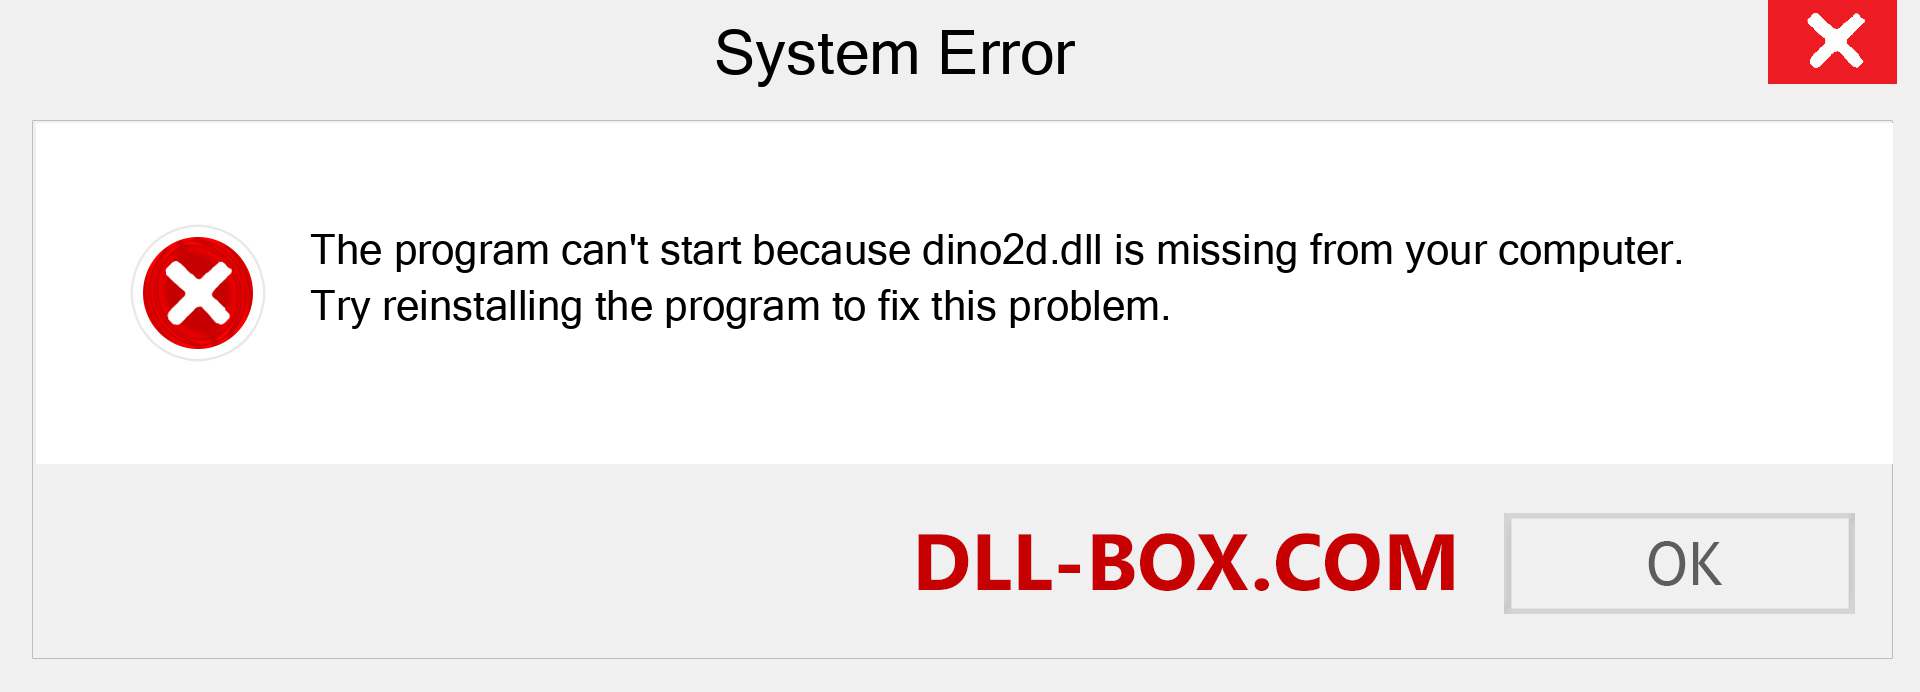  dino2d.dll file is missing?. Download for Windows 7, 8, 10 - Fix  dino2d dll Missing Error on Windows, photos, images